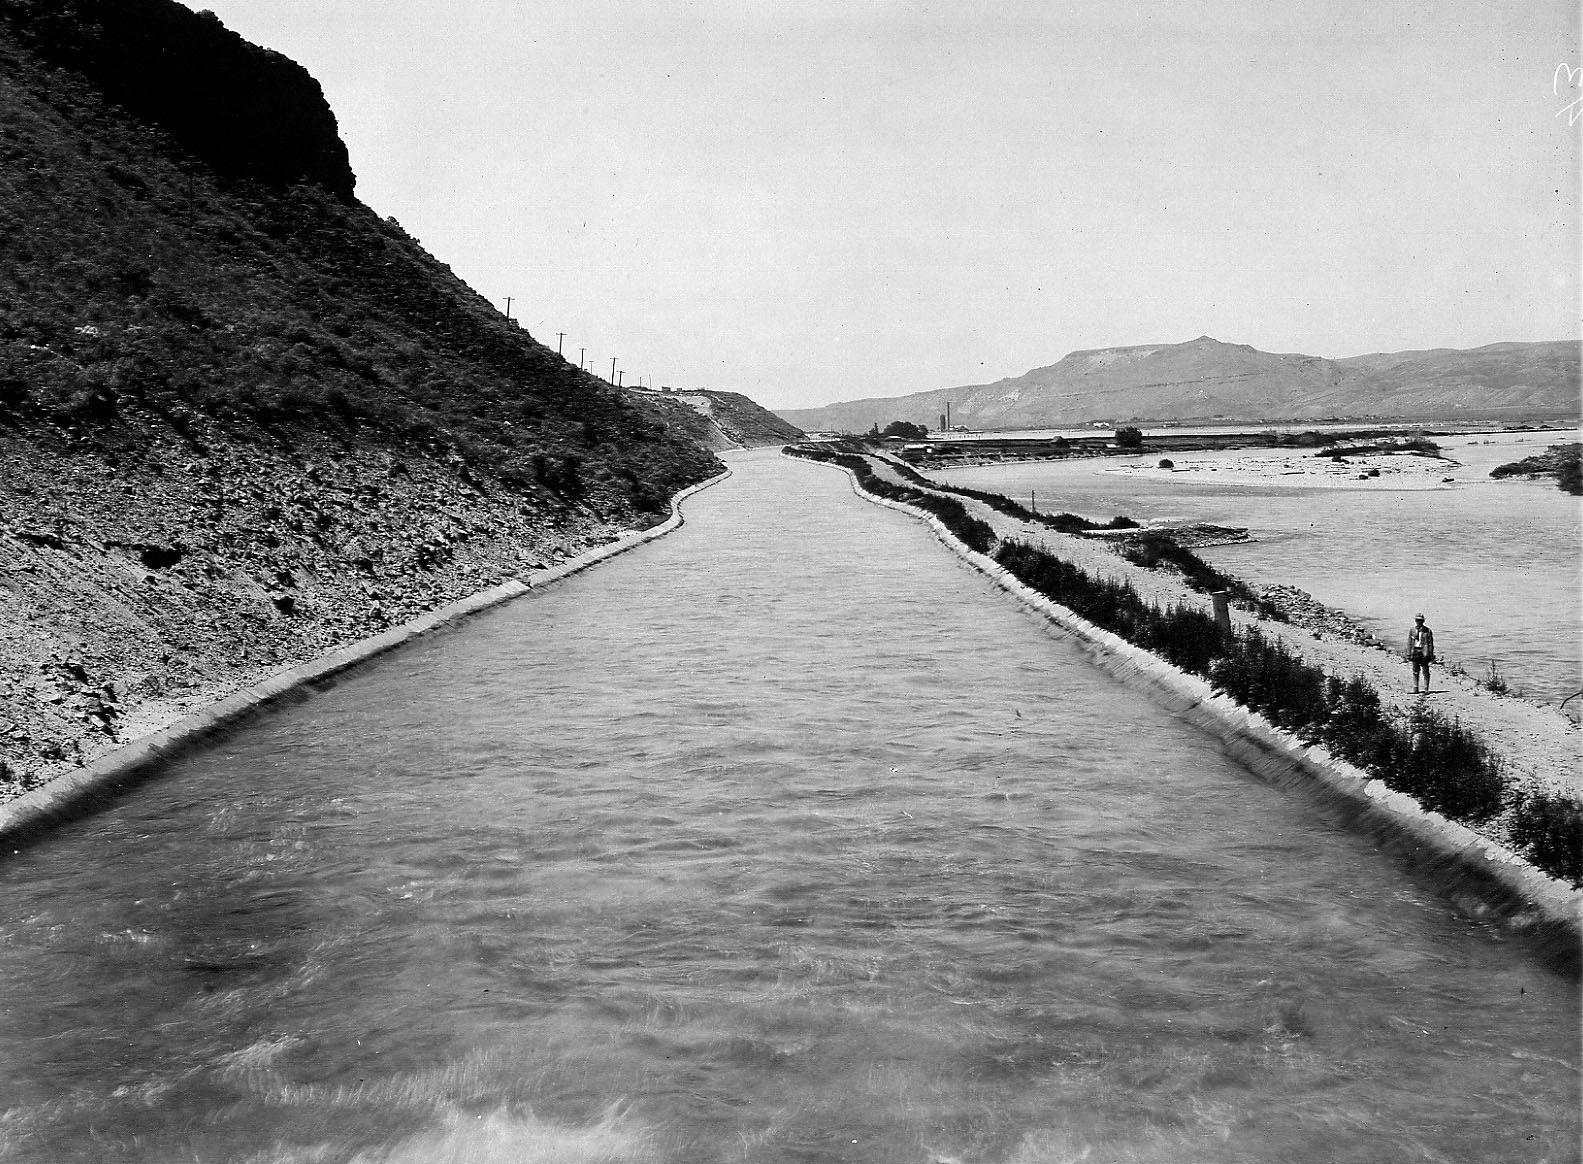 Concrete lined portion of the main South Canal, looking down canal from Boise Diversion Dam. June 13, 1910